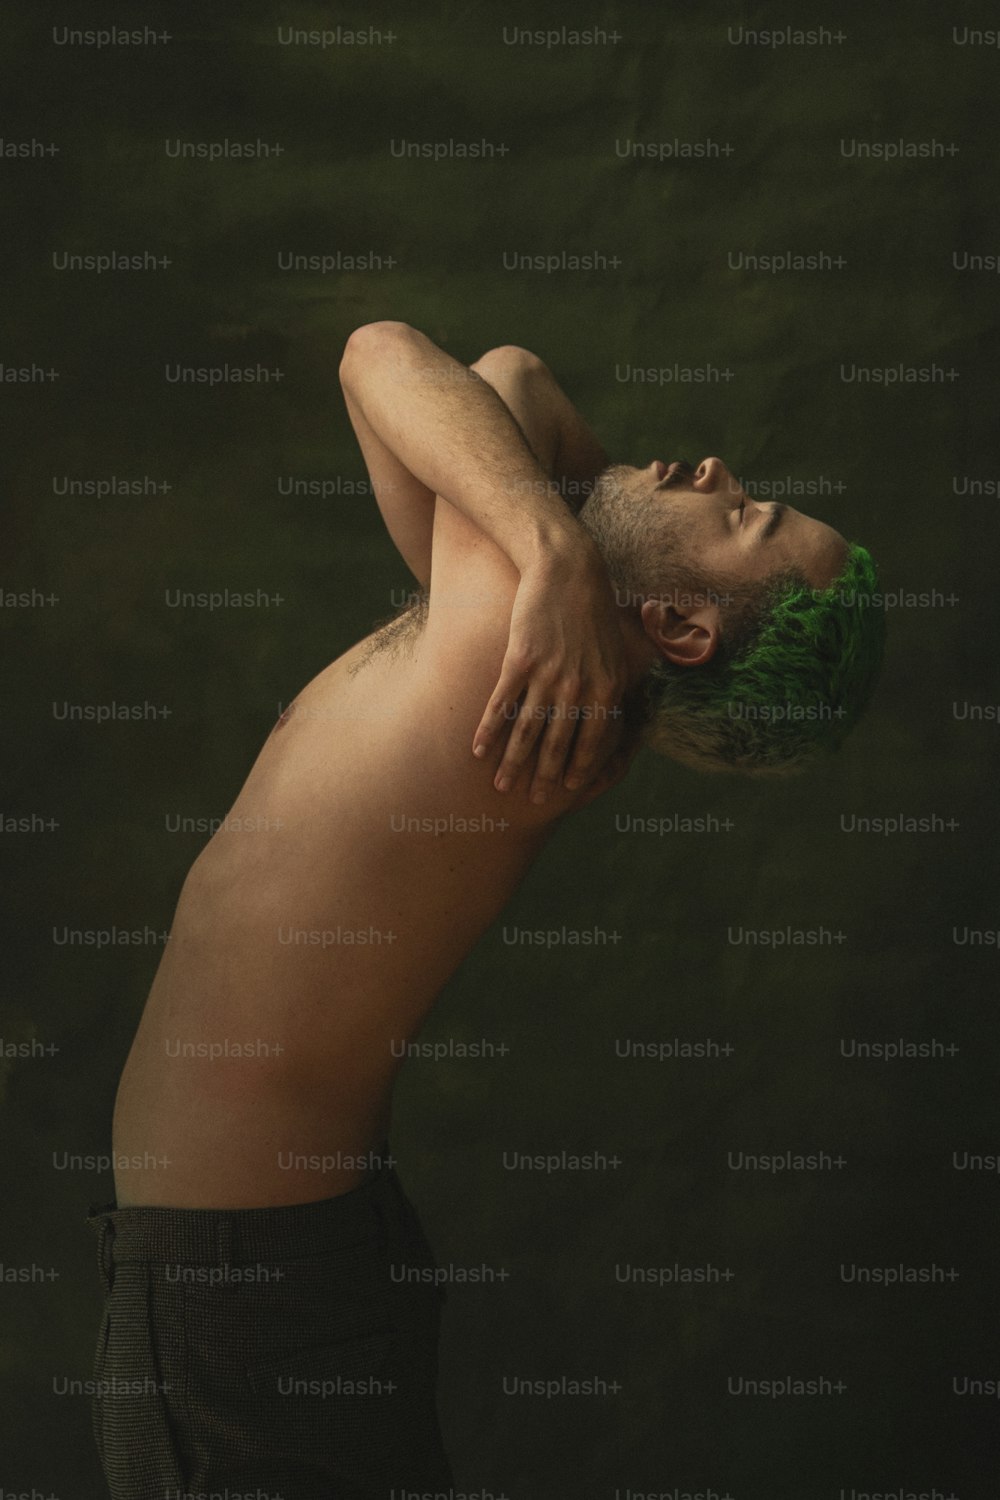 a shirtless man with green hair and a beard